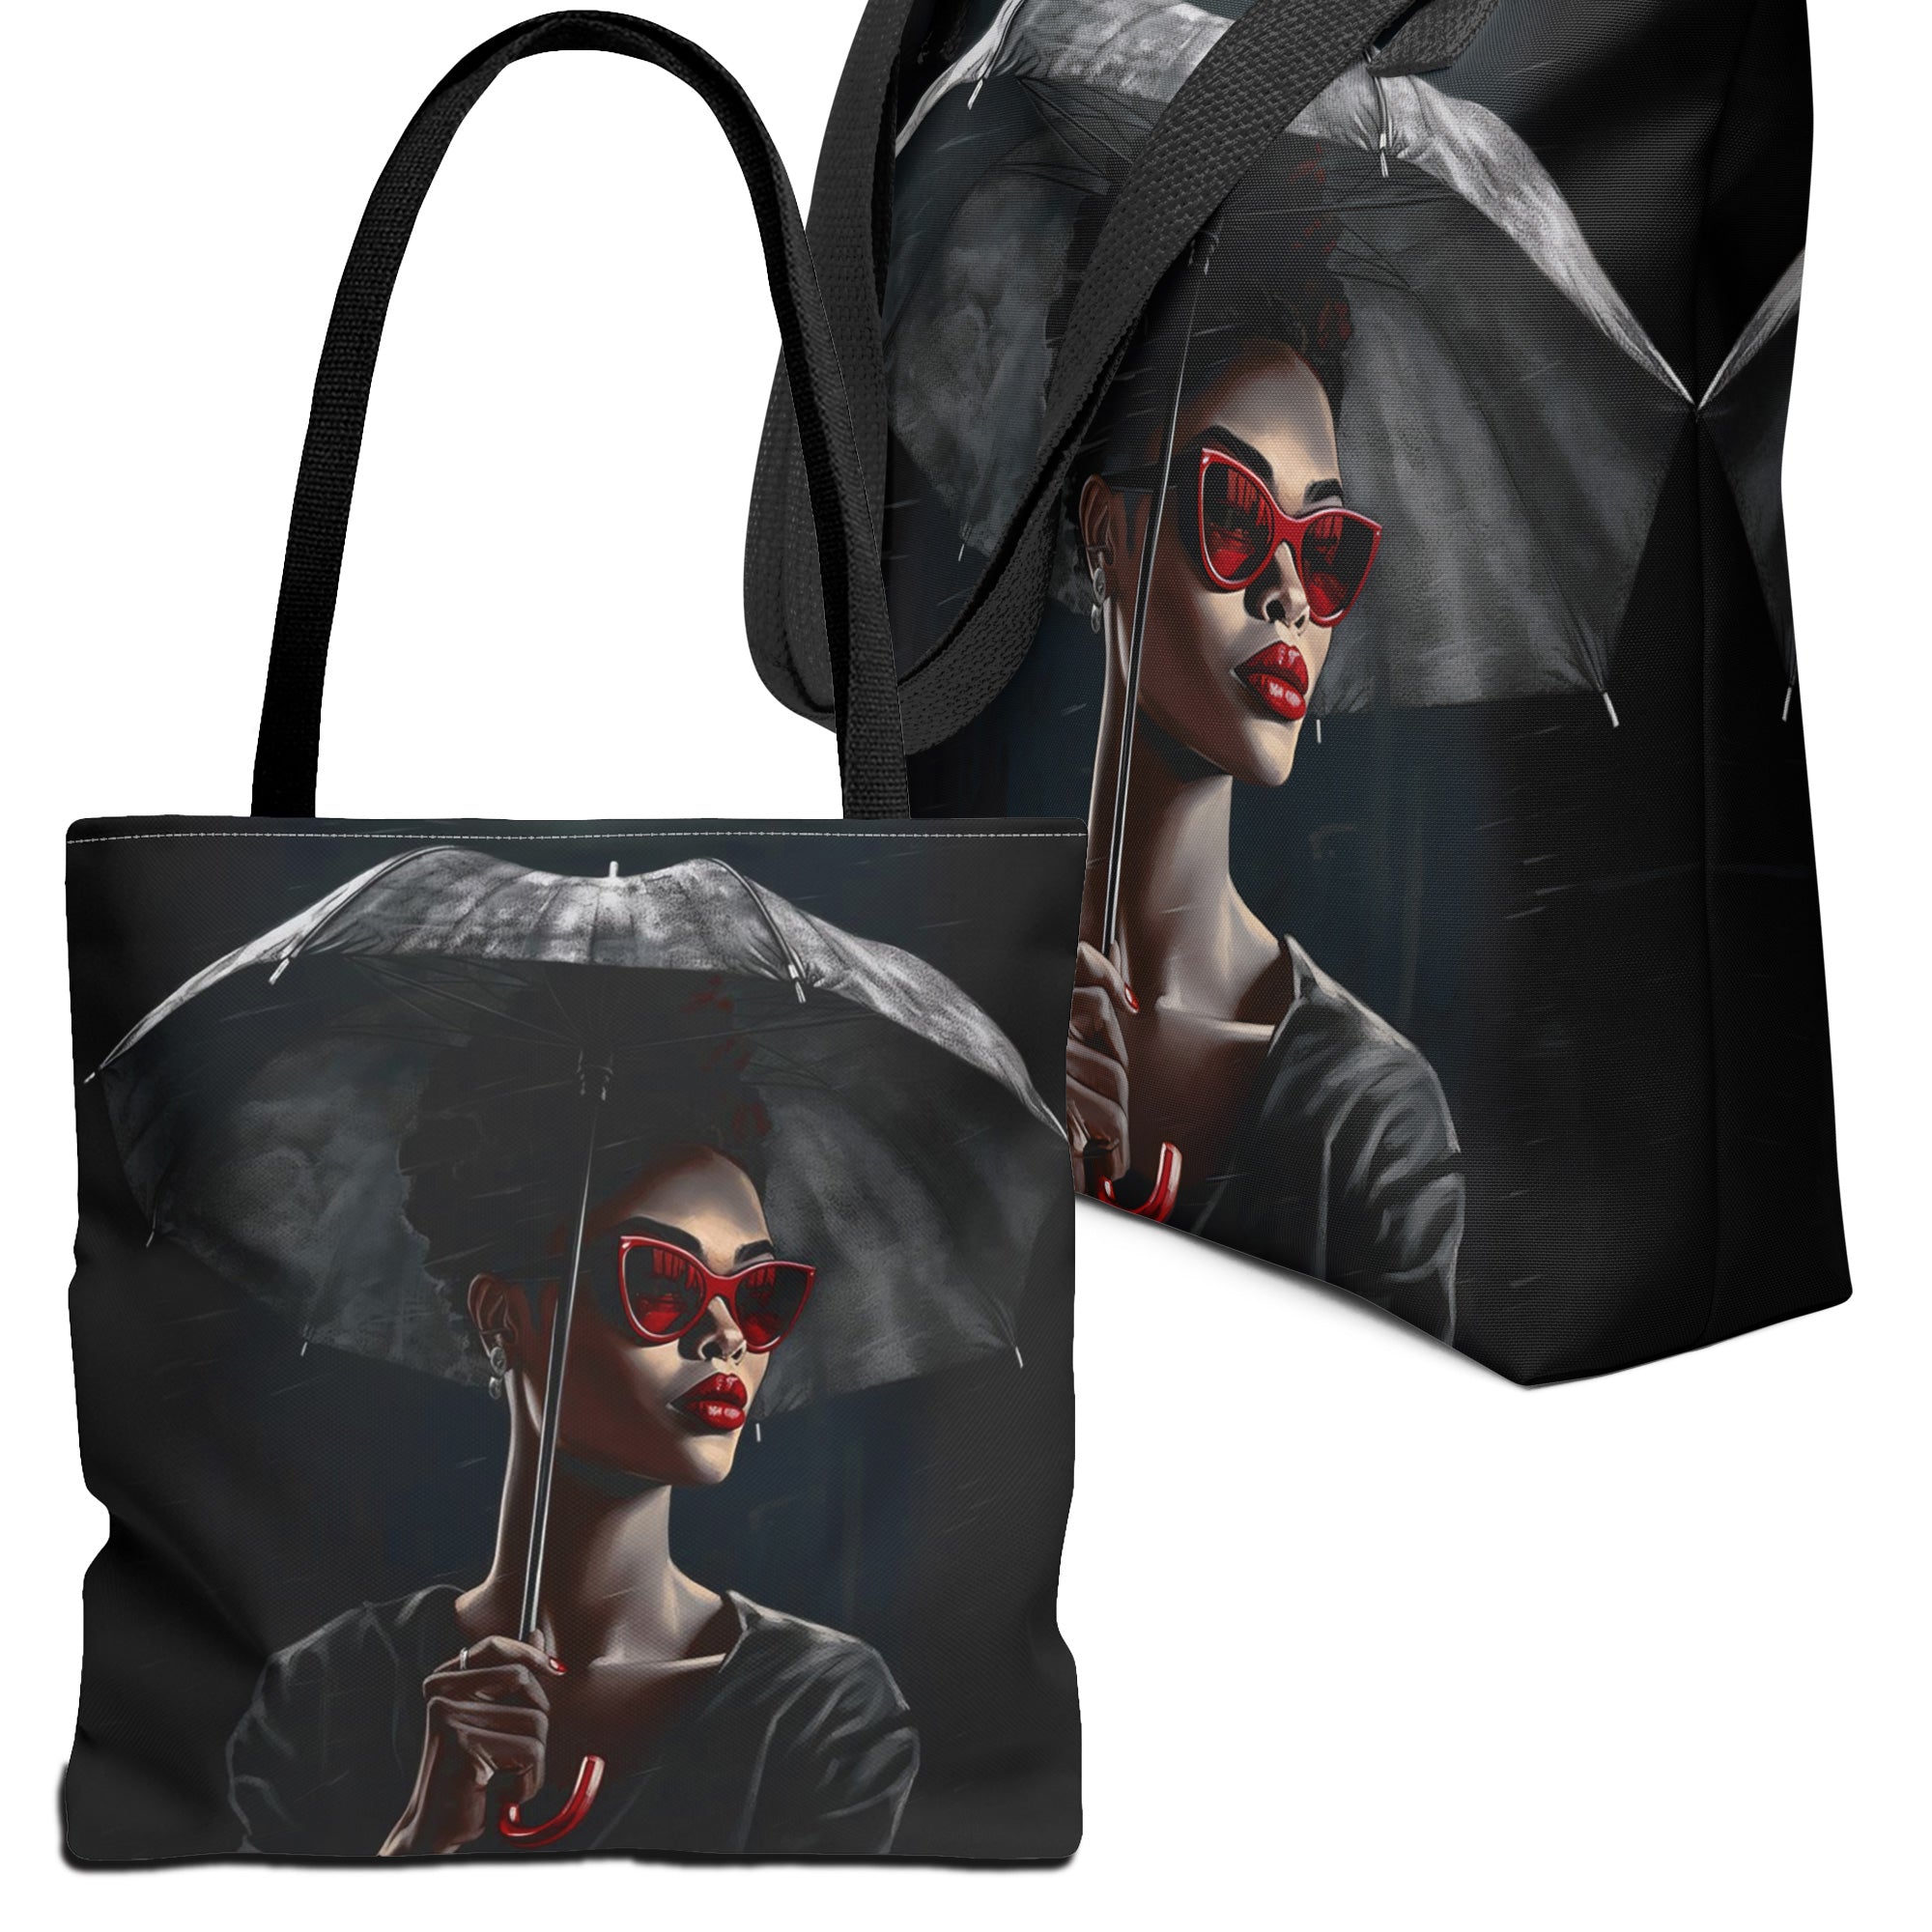 Black Fashionista Tote Bag Stormy Weather - front and side view.